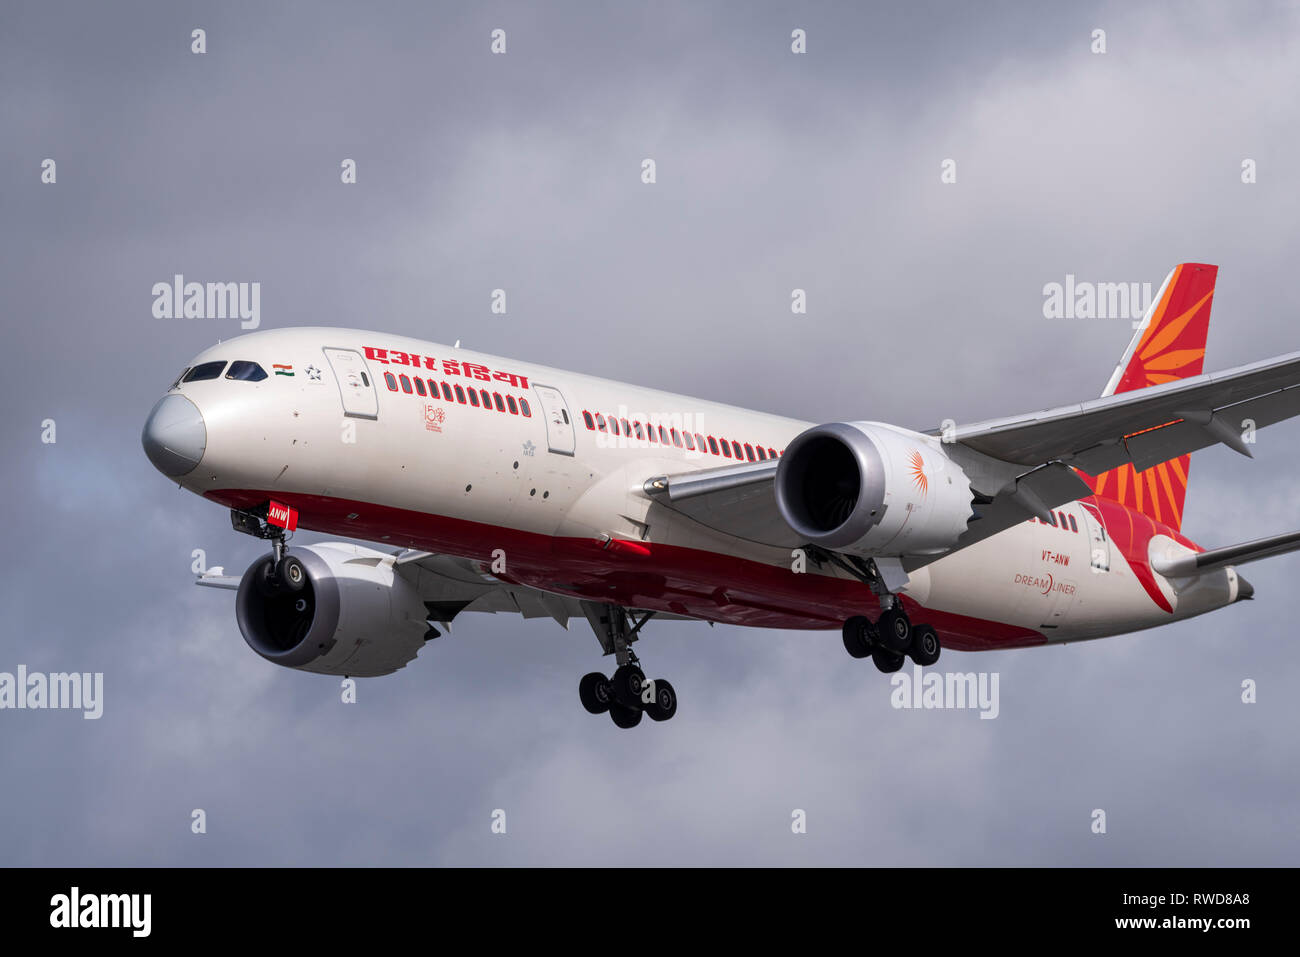 Air India Boeing 787 Dreamliner jet plane airliner VT-ANW landing at London Heathrow Airport, UK Stock Photo